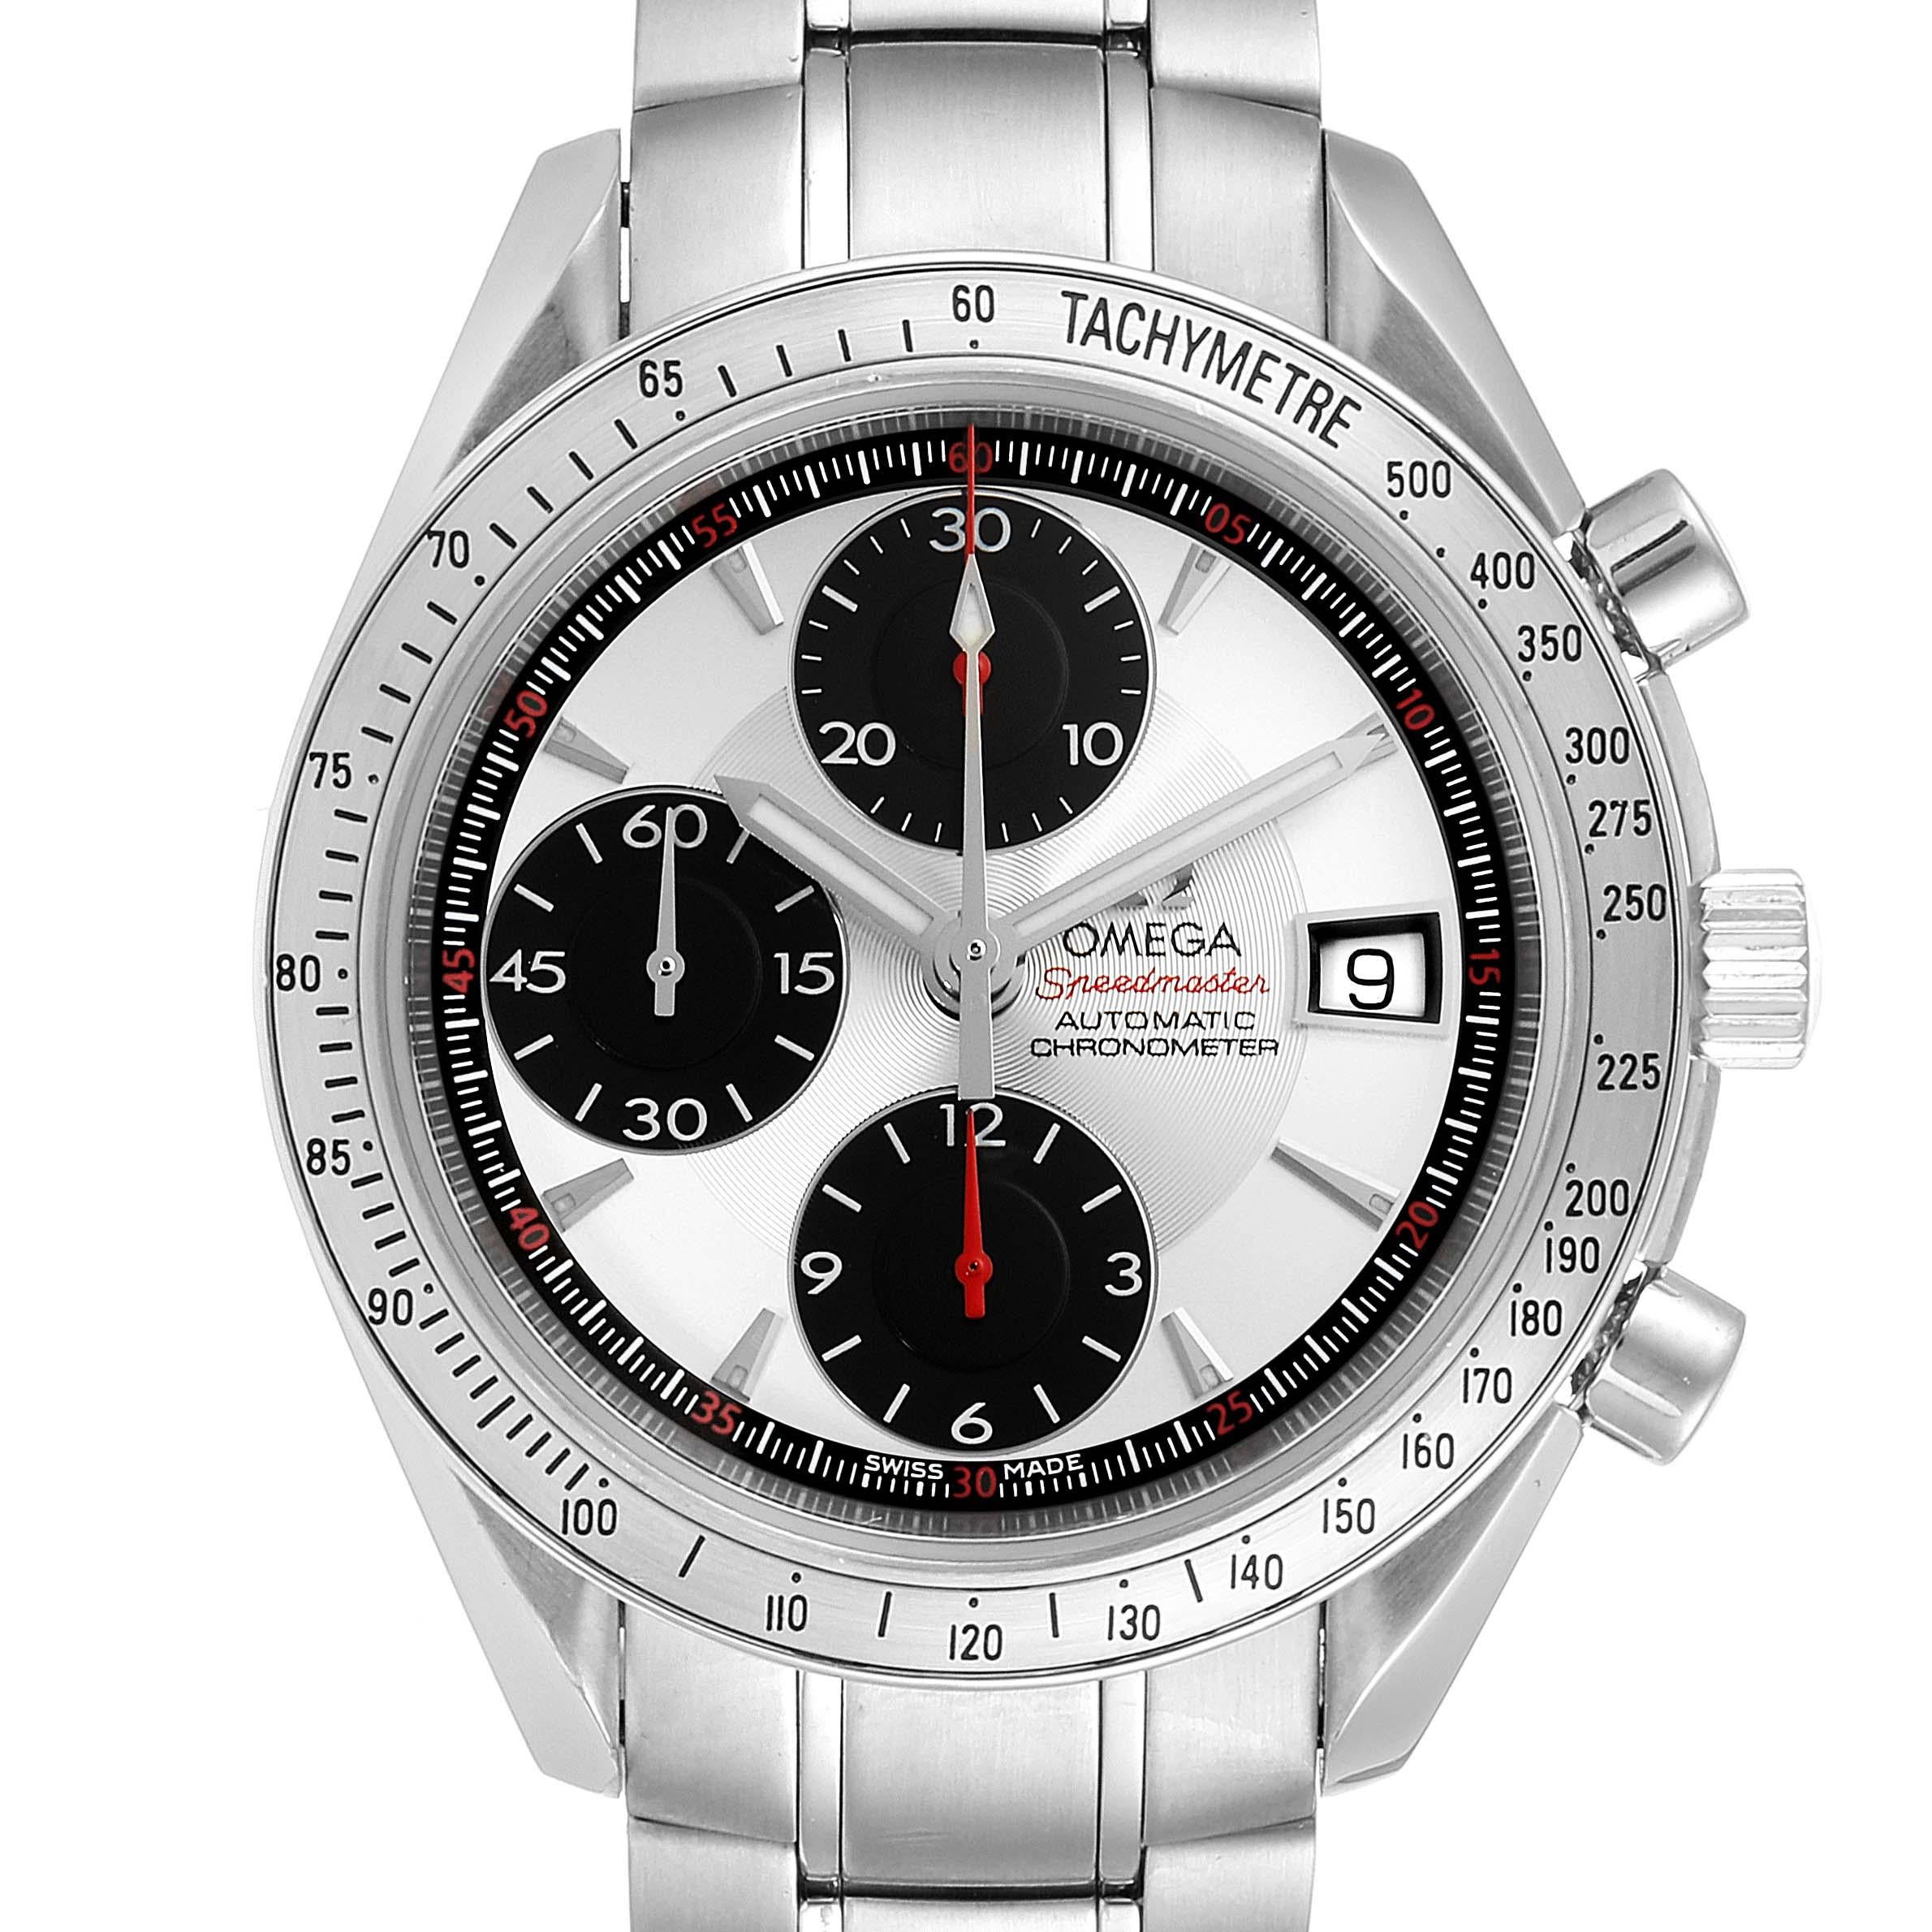 Omega Speedmaster Day-Date Panda Dial Mens Watch 3211.31.00. Automatic self-winding chronograph movement. Stainless steel round case 40.0 mm in diameter. Stainless steel bezel with tachymetric scale. Scratch-resistant sapphire crystal with